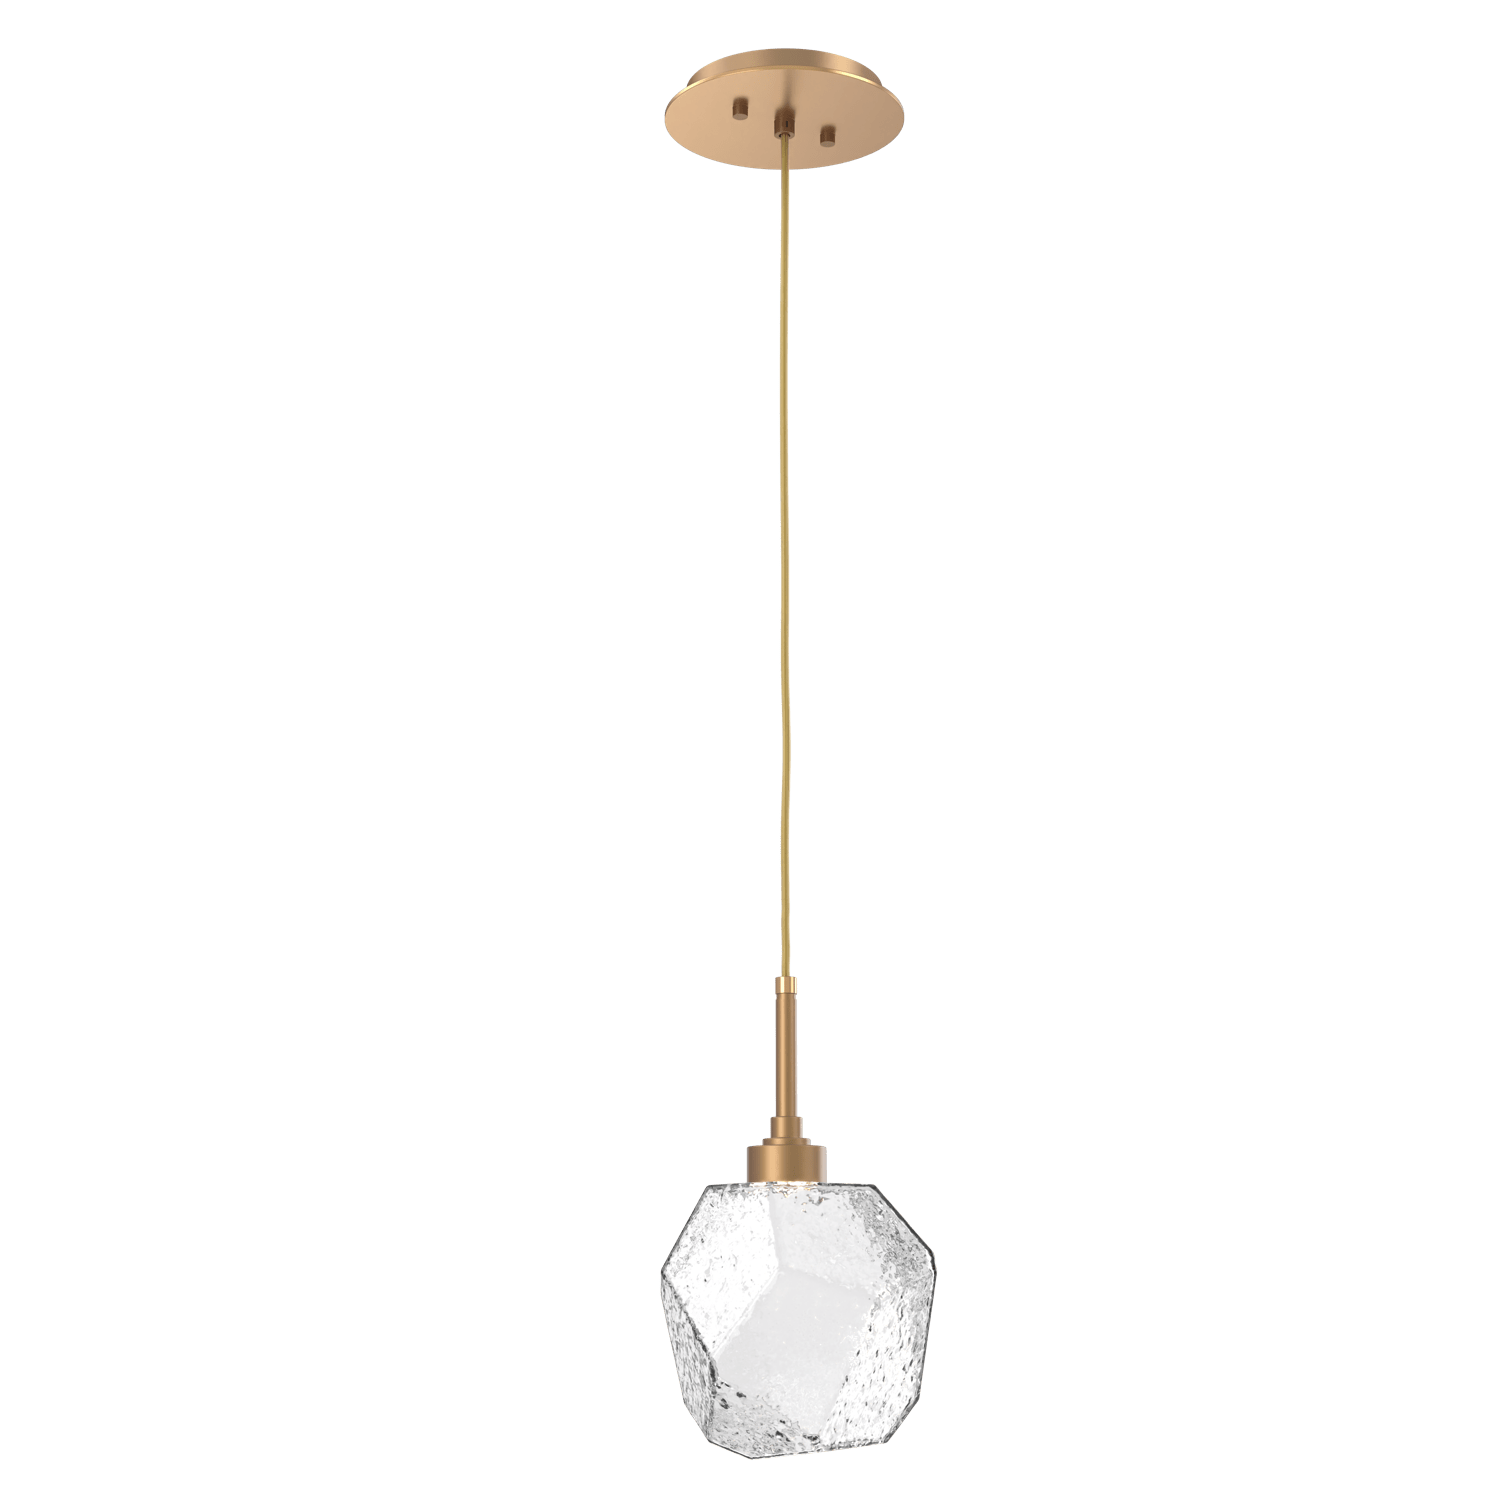 LAB0039-01-NB-C-Hammerton-Studio-Gem-pendant-light-with-novel-brass-finish-and-clear-blown-glass-shades-and-LED-lamping